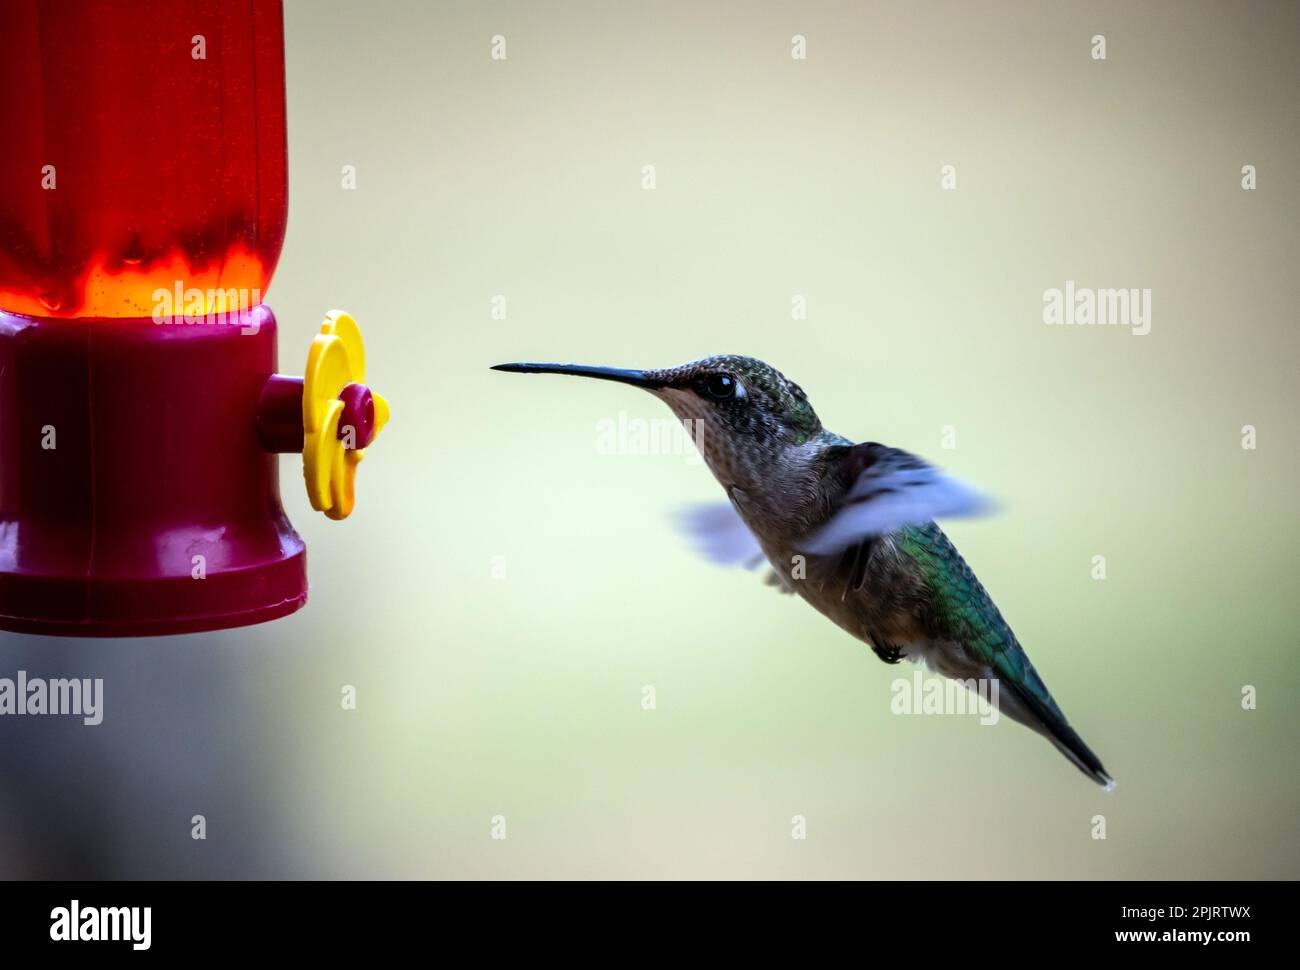 This beautiful green hummngbird is hovering at the nectar feeder with rapidly flapping wings in full motion. Bokeh. Stock Photo